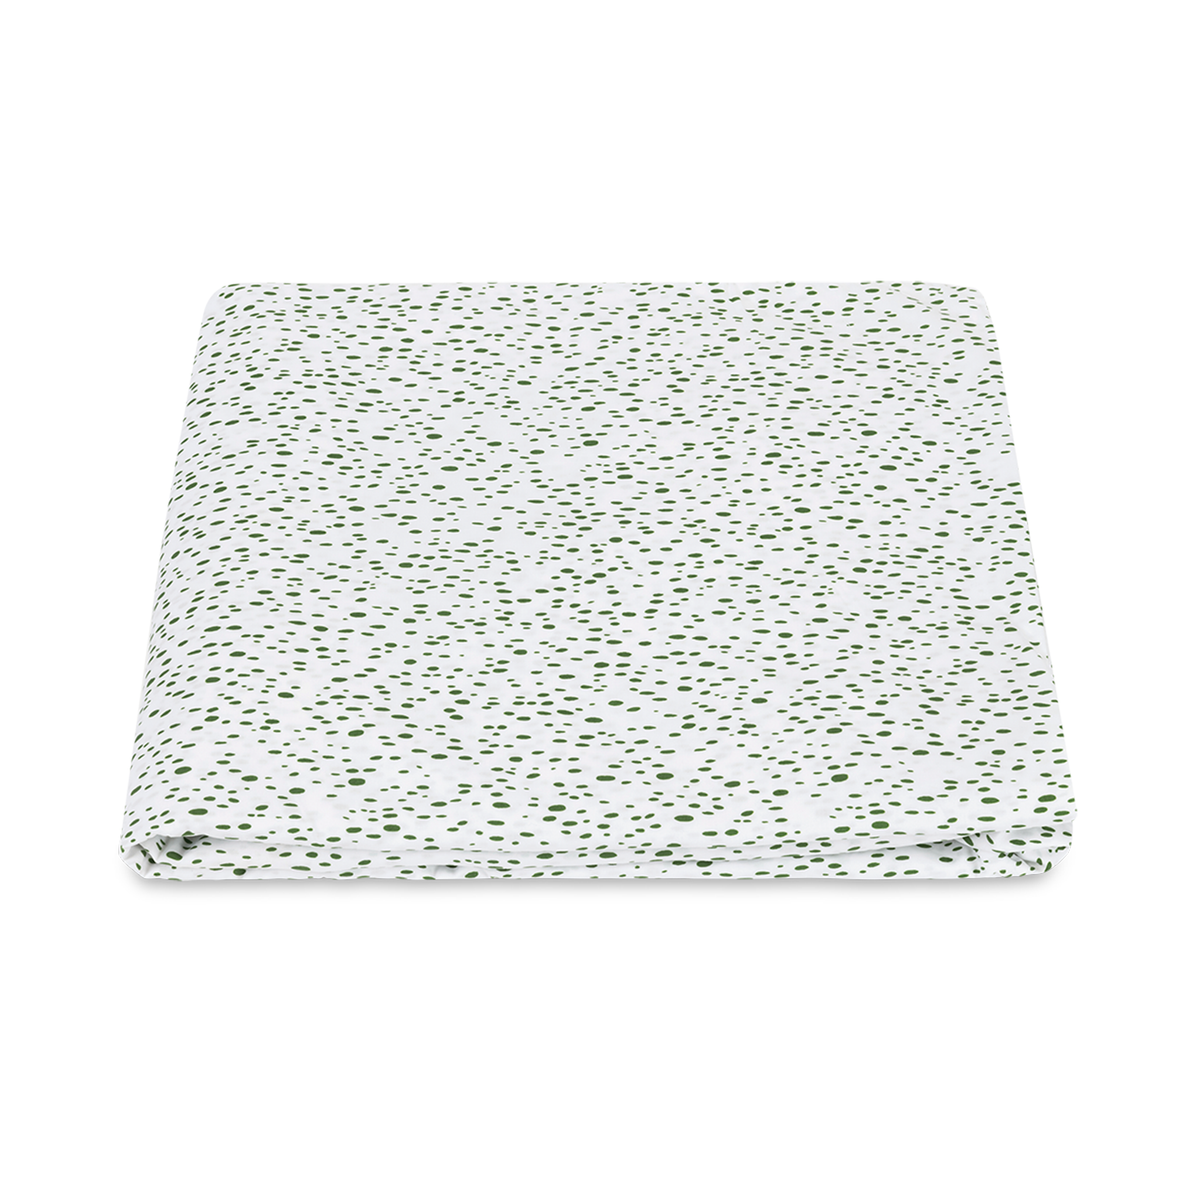 Folded Fitted Sheet of Matouk Celine Bedding in Grass Color